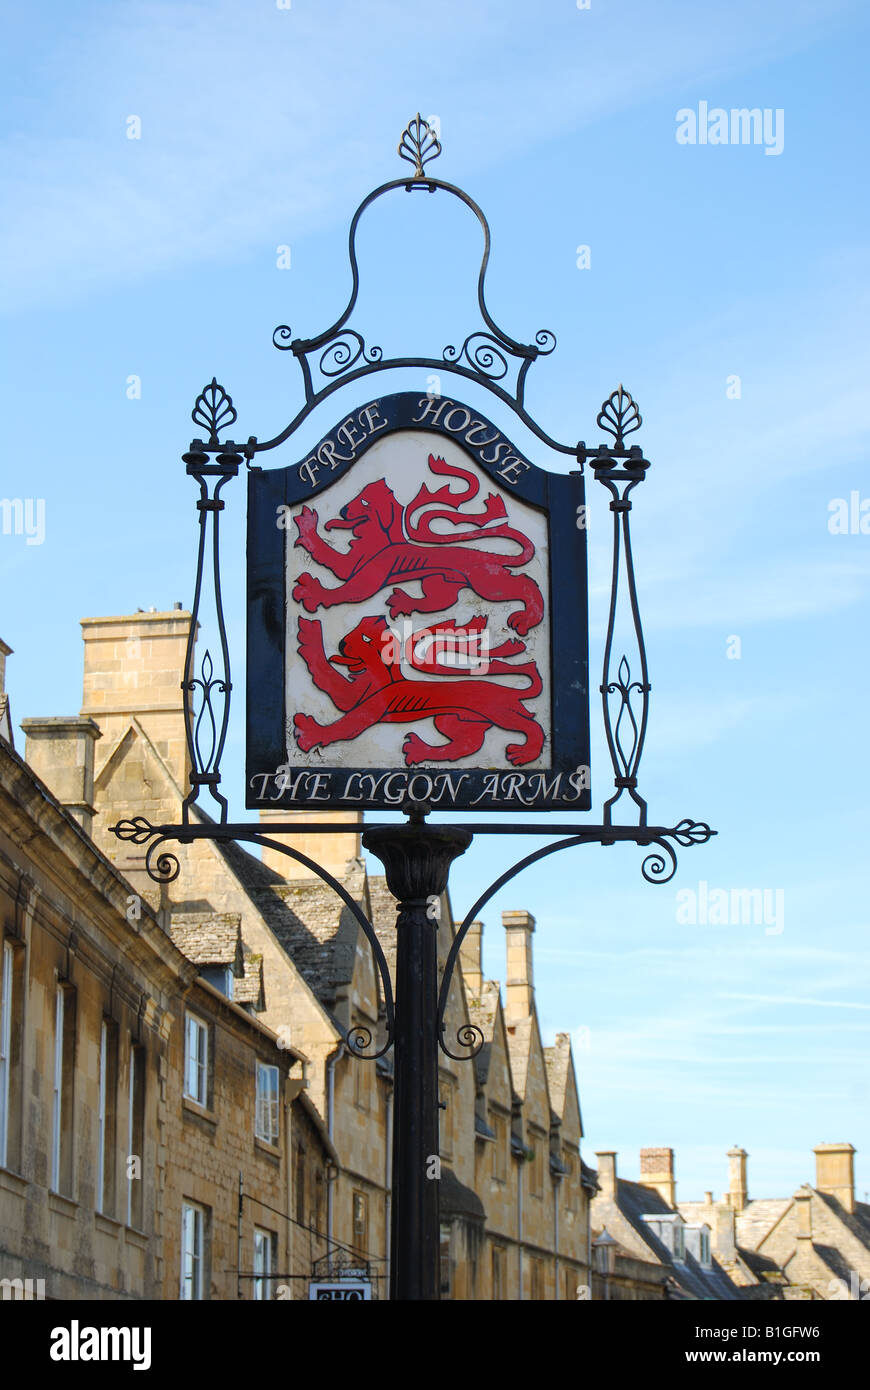 The 16th Century Lygon Arms Hotel sign, High Street, Chipping Campden, Cotswolds, Gloucestershire, England, United Kingdom Stock Photo